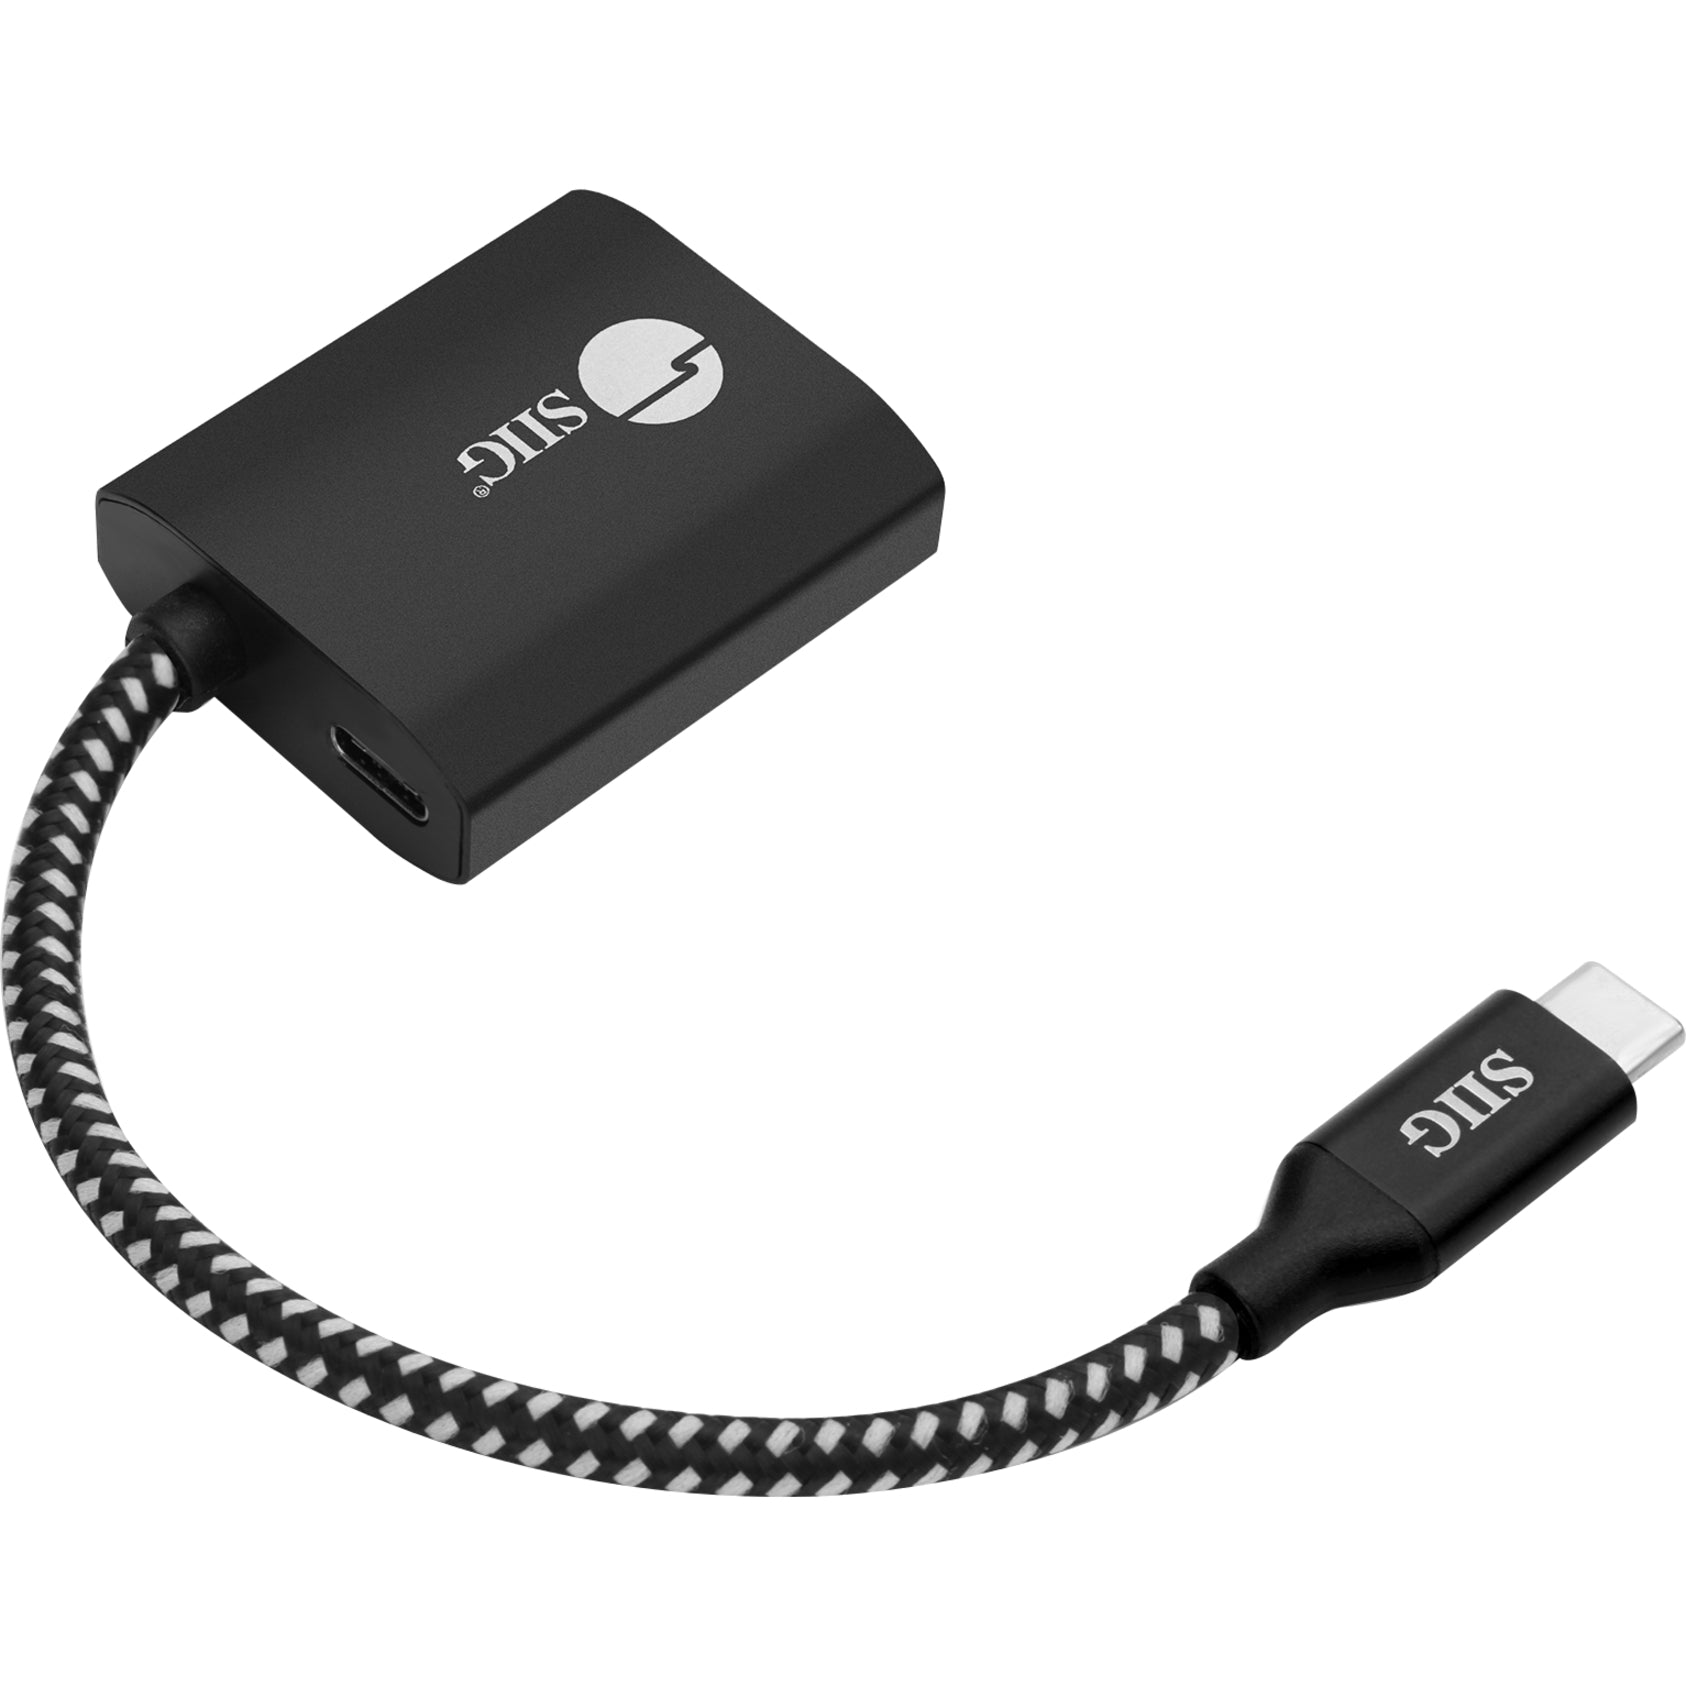 SIIG CB-TC0811-S1 USB Type-C to HDMI Video Cable Adapter with PD Charging, External Graphic Adapter